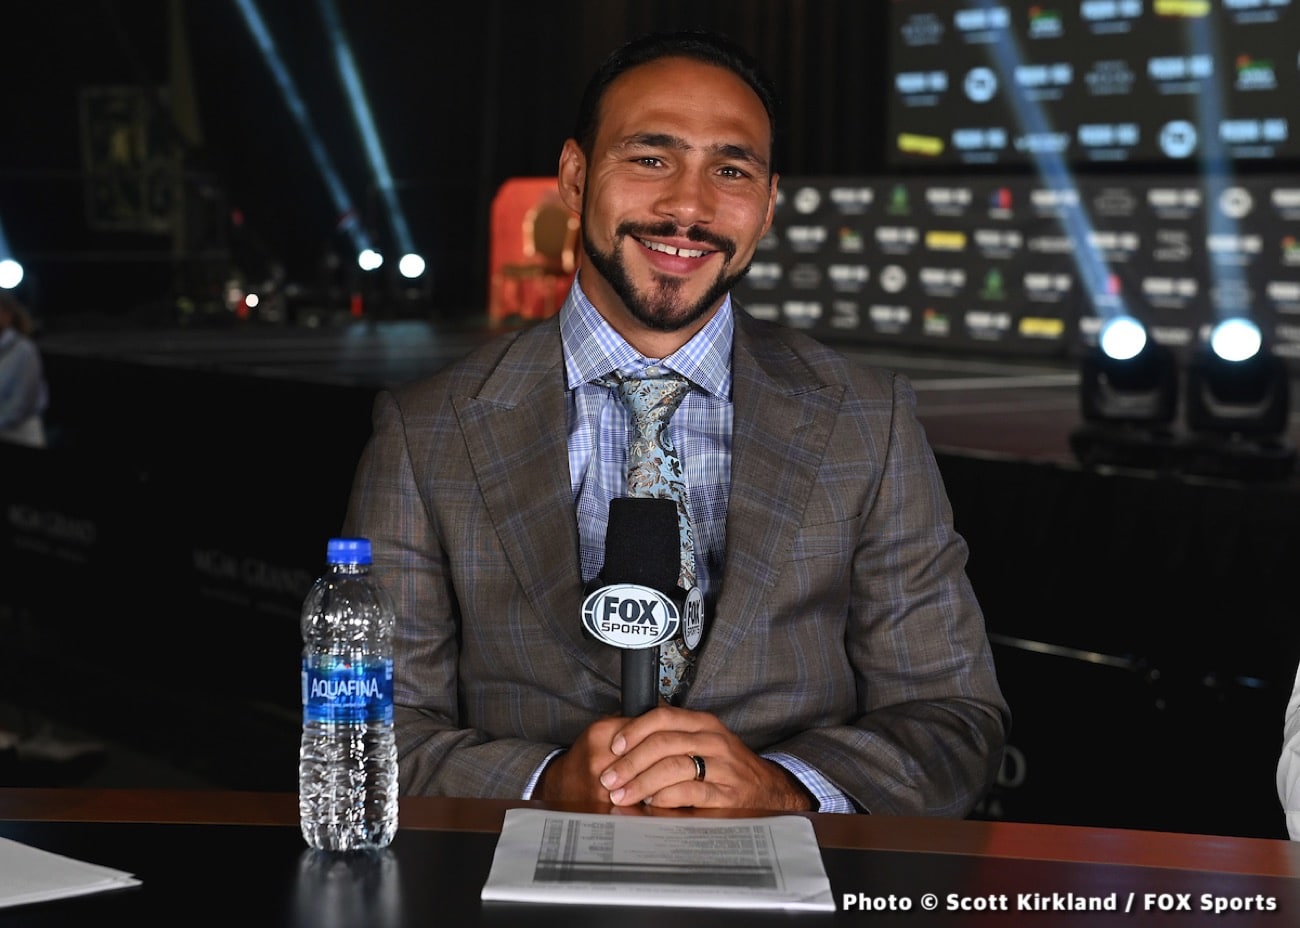 Keith Thurman to show if he's Washed up or not on Feb.5th against Mario Barrios